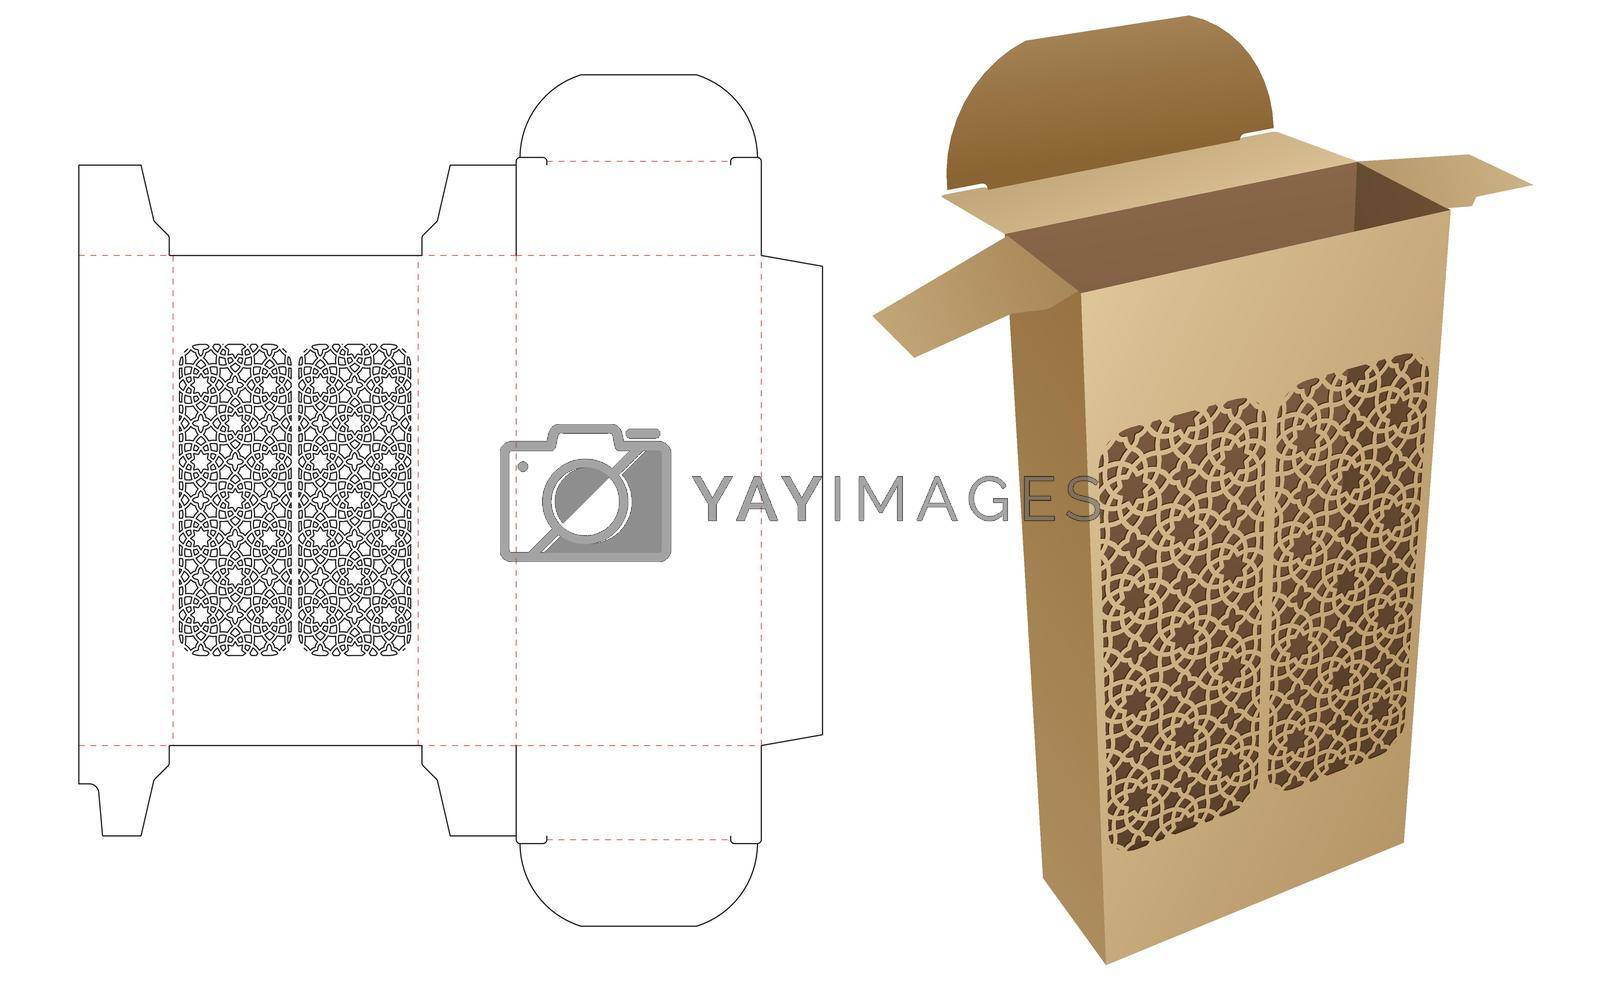 Royalty free image of Cardboard stenciled box with die cut template and 3D mockup by valueinvestor